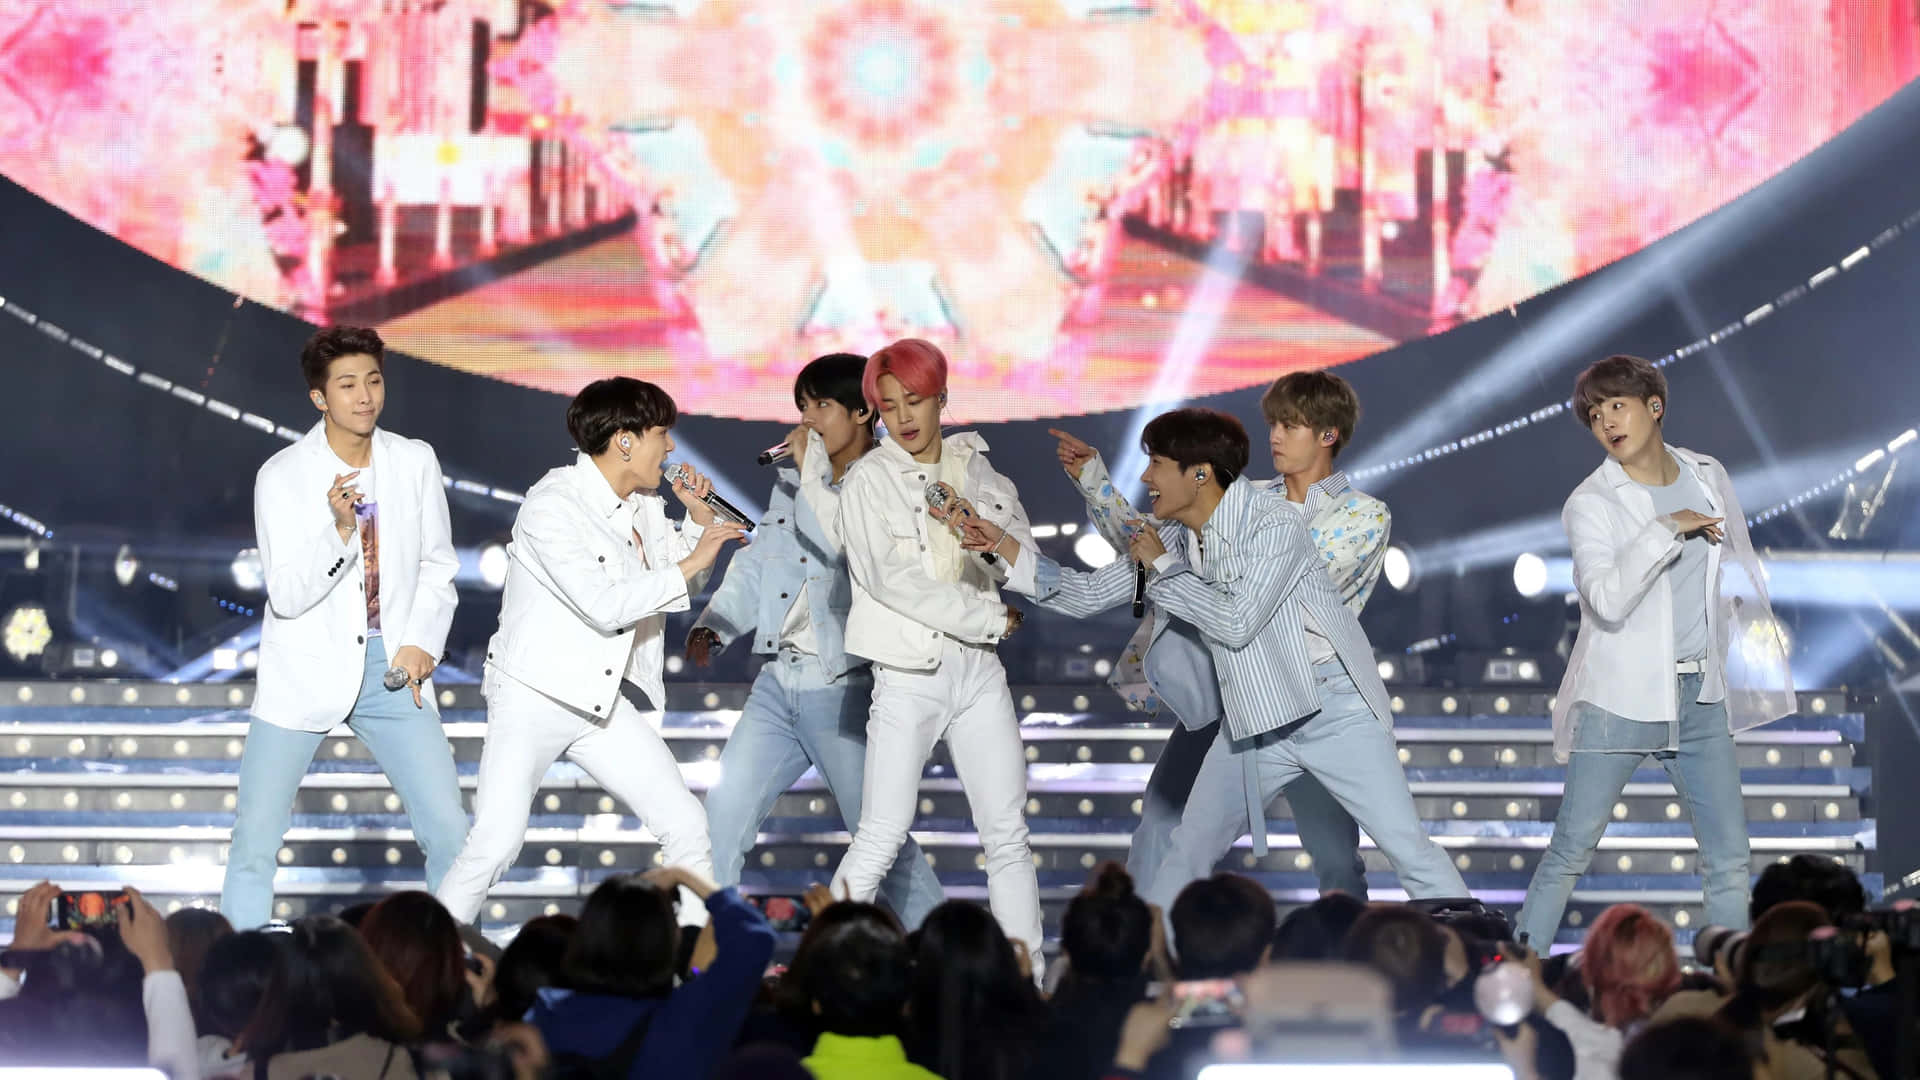 BTS electrifies their fans with an incredible concert performance.